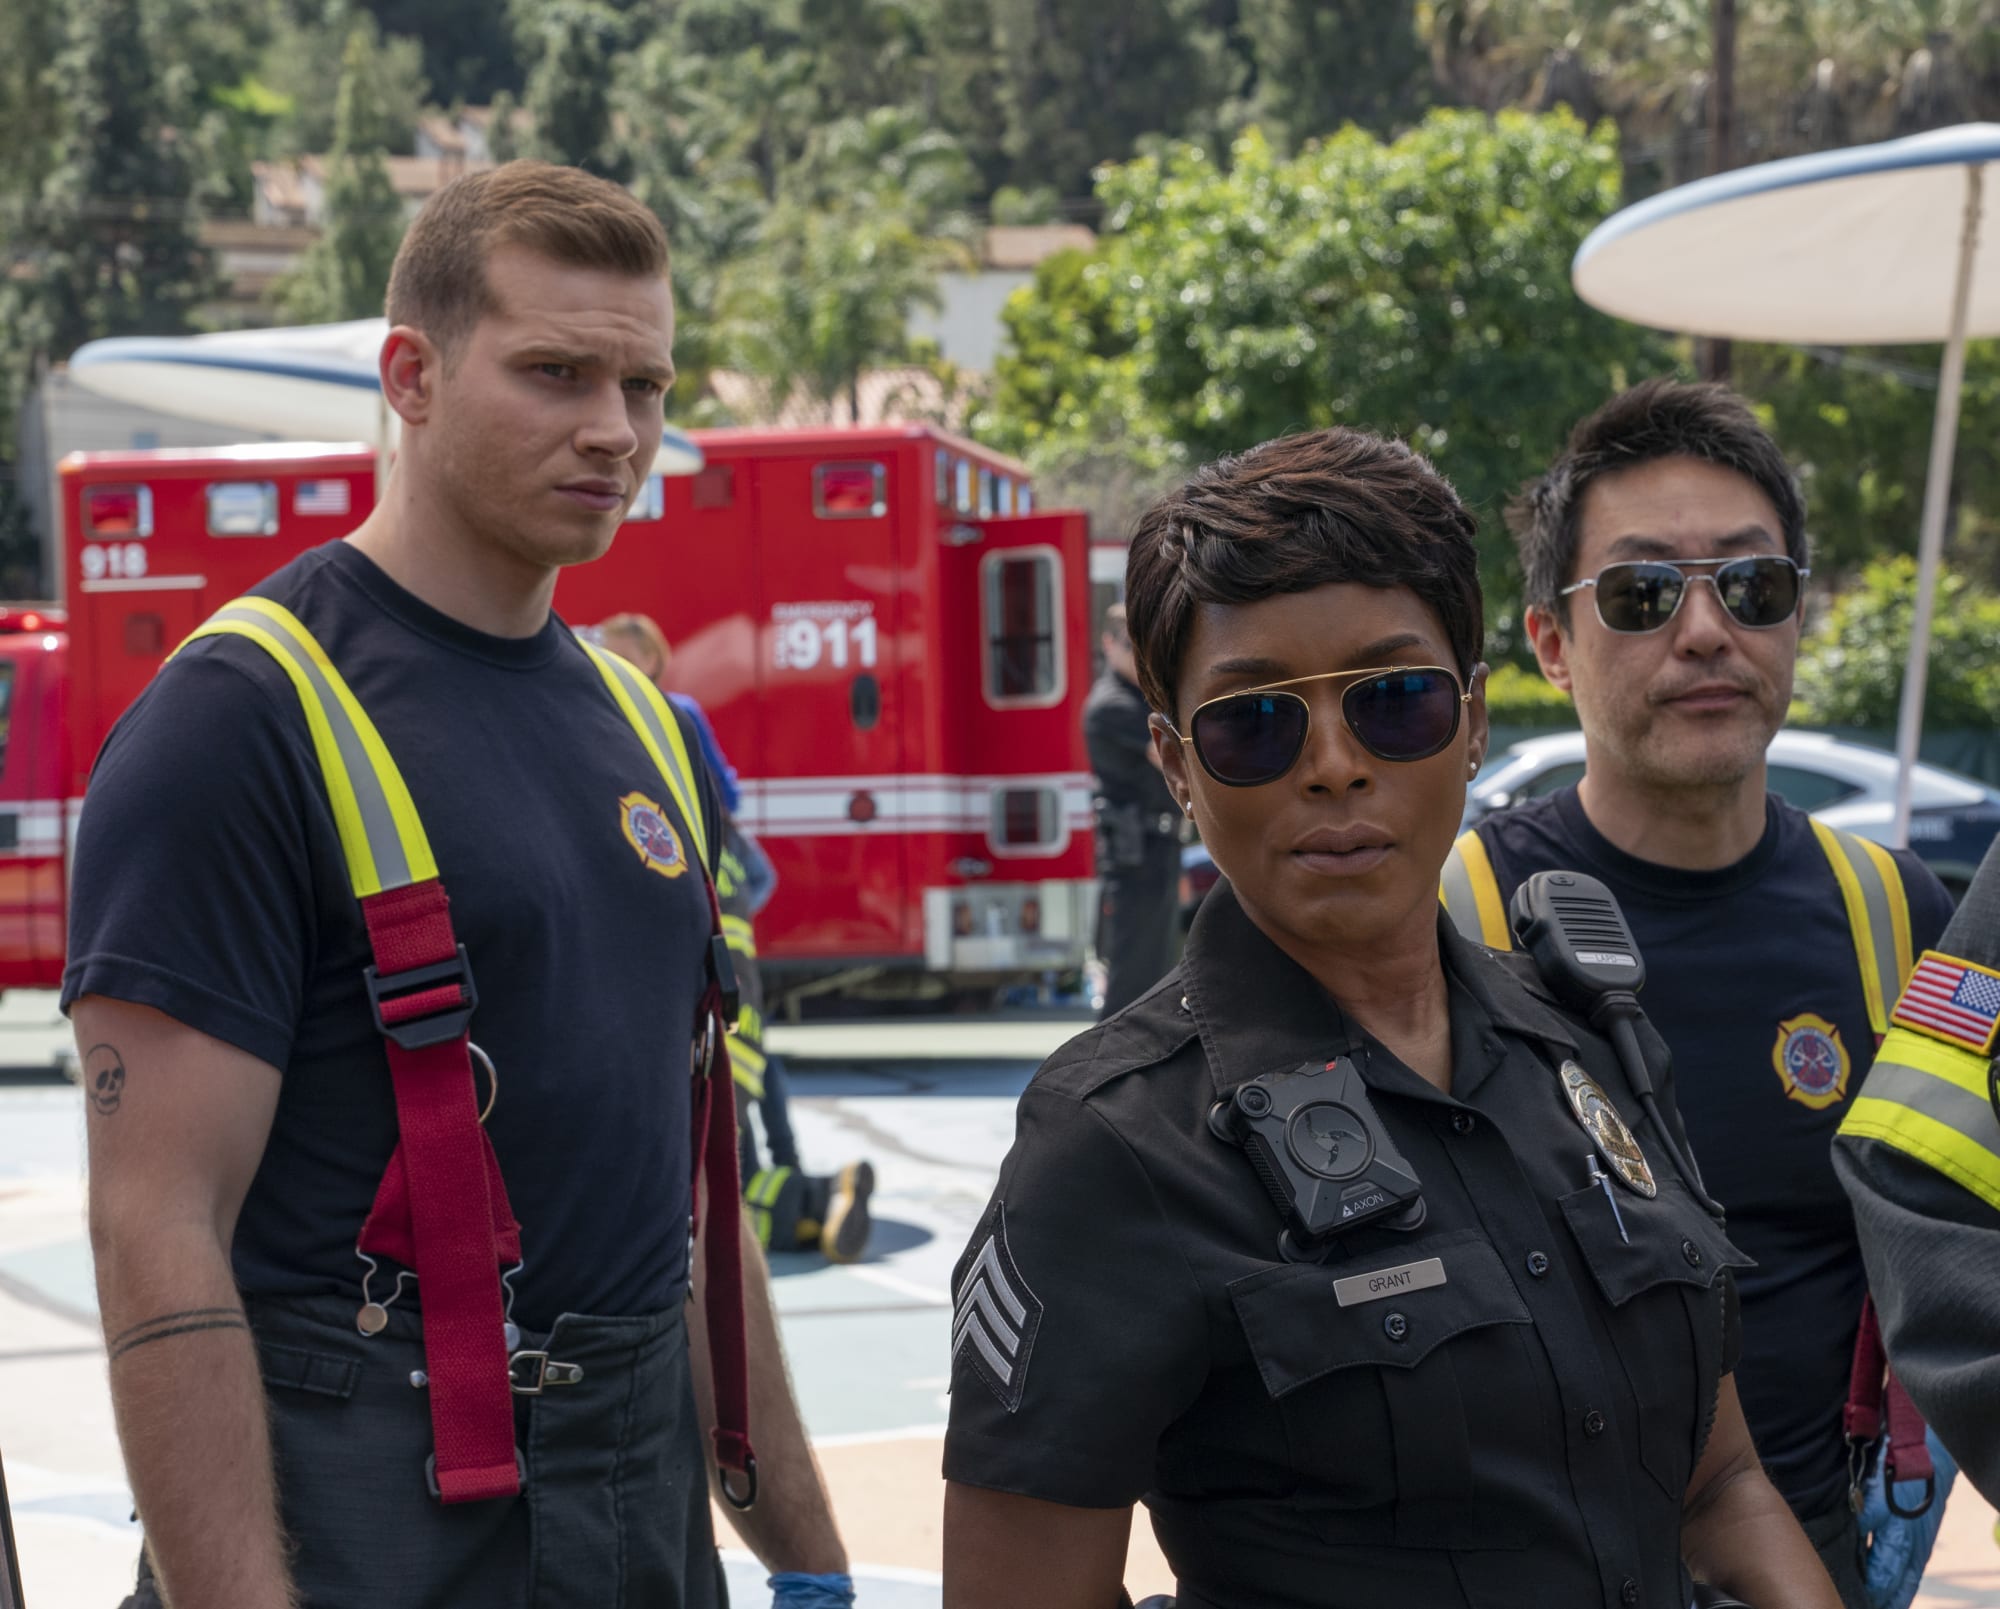 911 Season 4 premiere date, cast, trailer, synopsis, and more